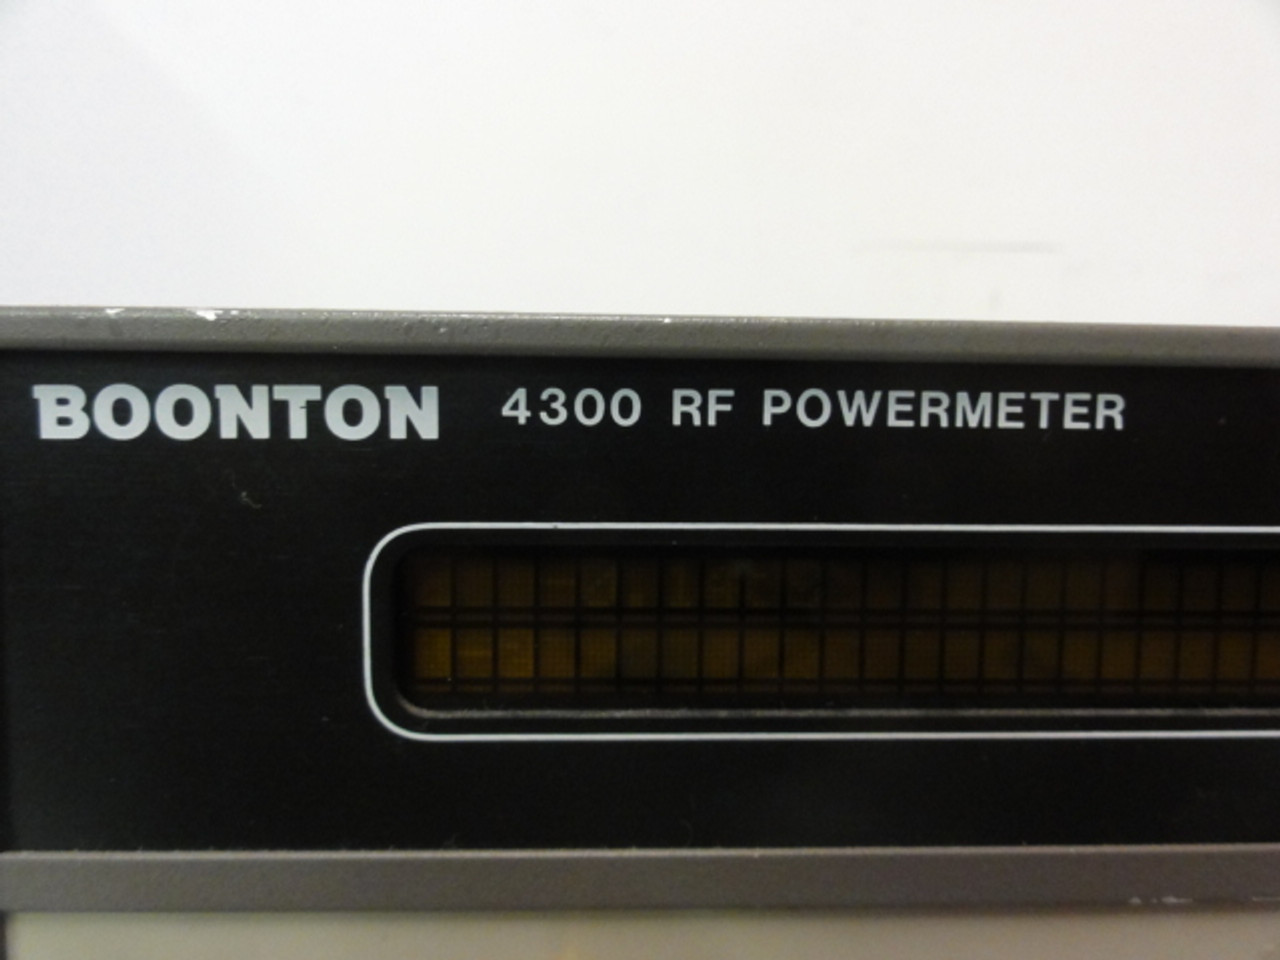 Boonton 4300 RF 6 Channel Power Meter, Powers Up But is Untested